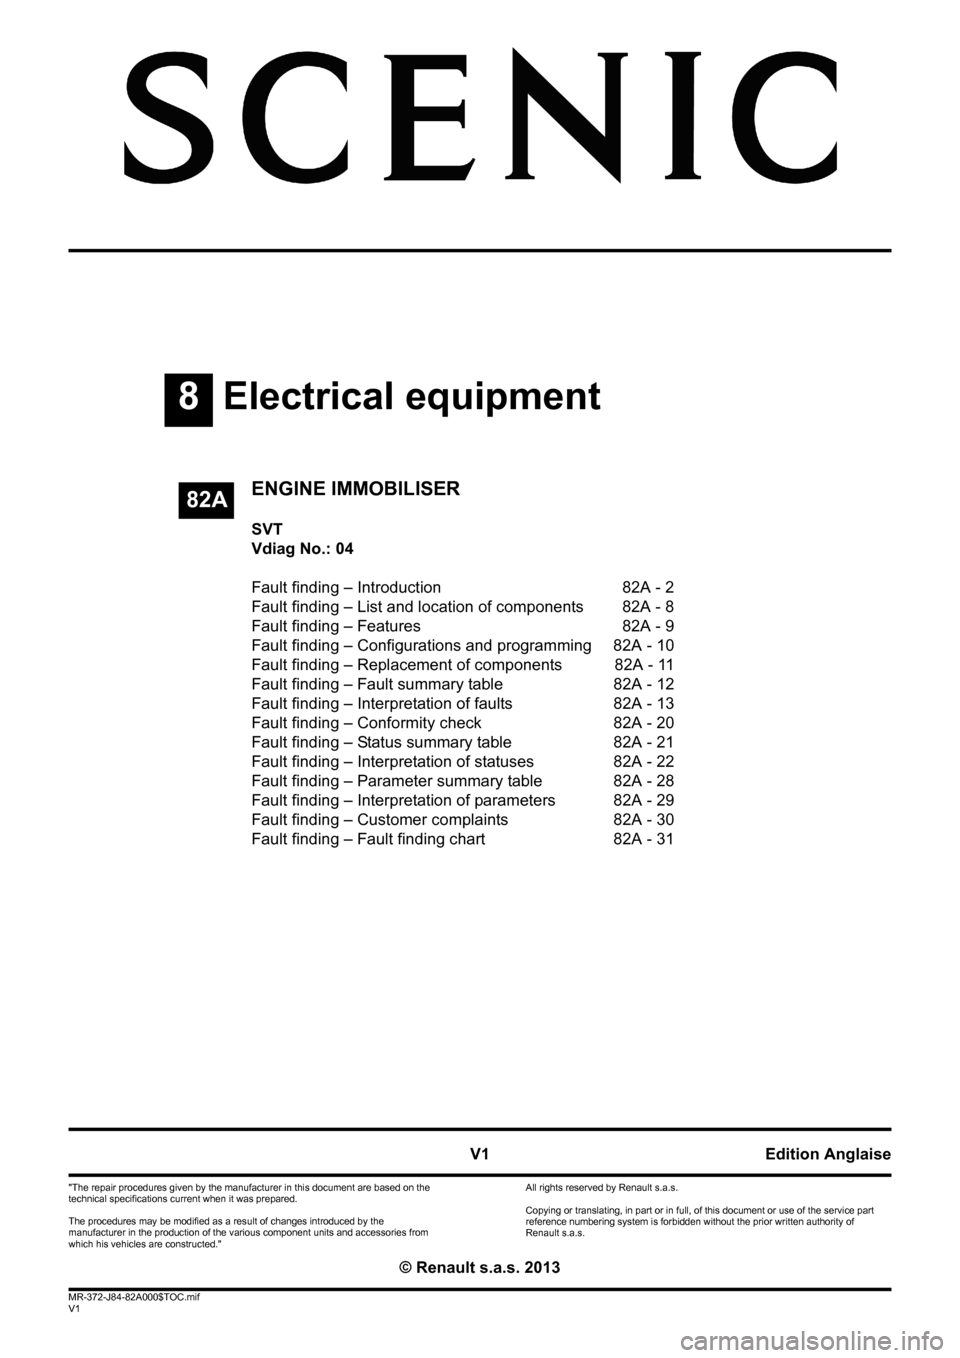 RENAULT SCENIC 2013 J95 / 3.G Electrical Equipment Immobiliser Workshop Manual 8Electrical equipment
V1 MR-372-J84-82A000$TOC.mif
V1
82A
"The repair procedures given by the manufacturer in this document are based on the 
technical specifications current when it was prepared.
The